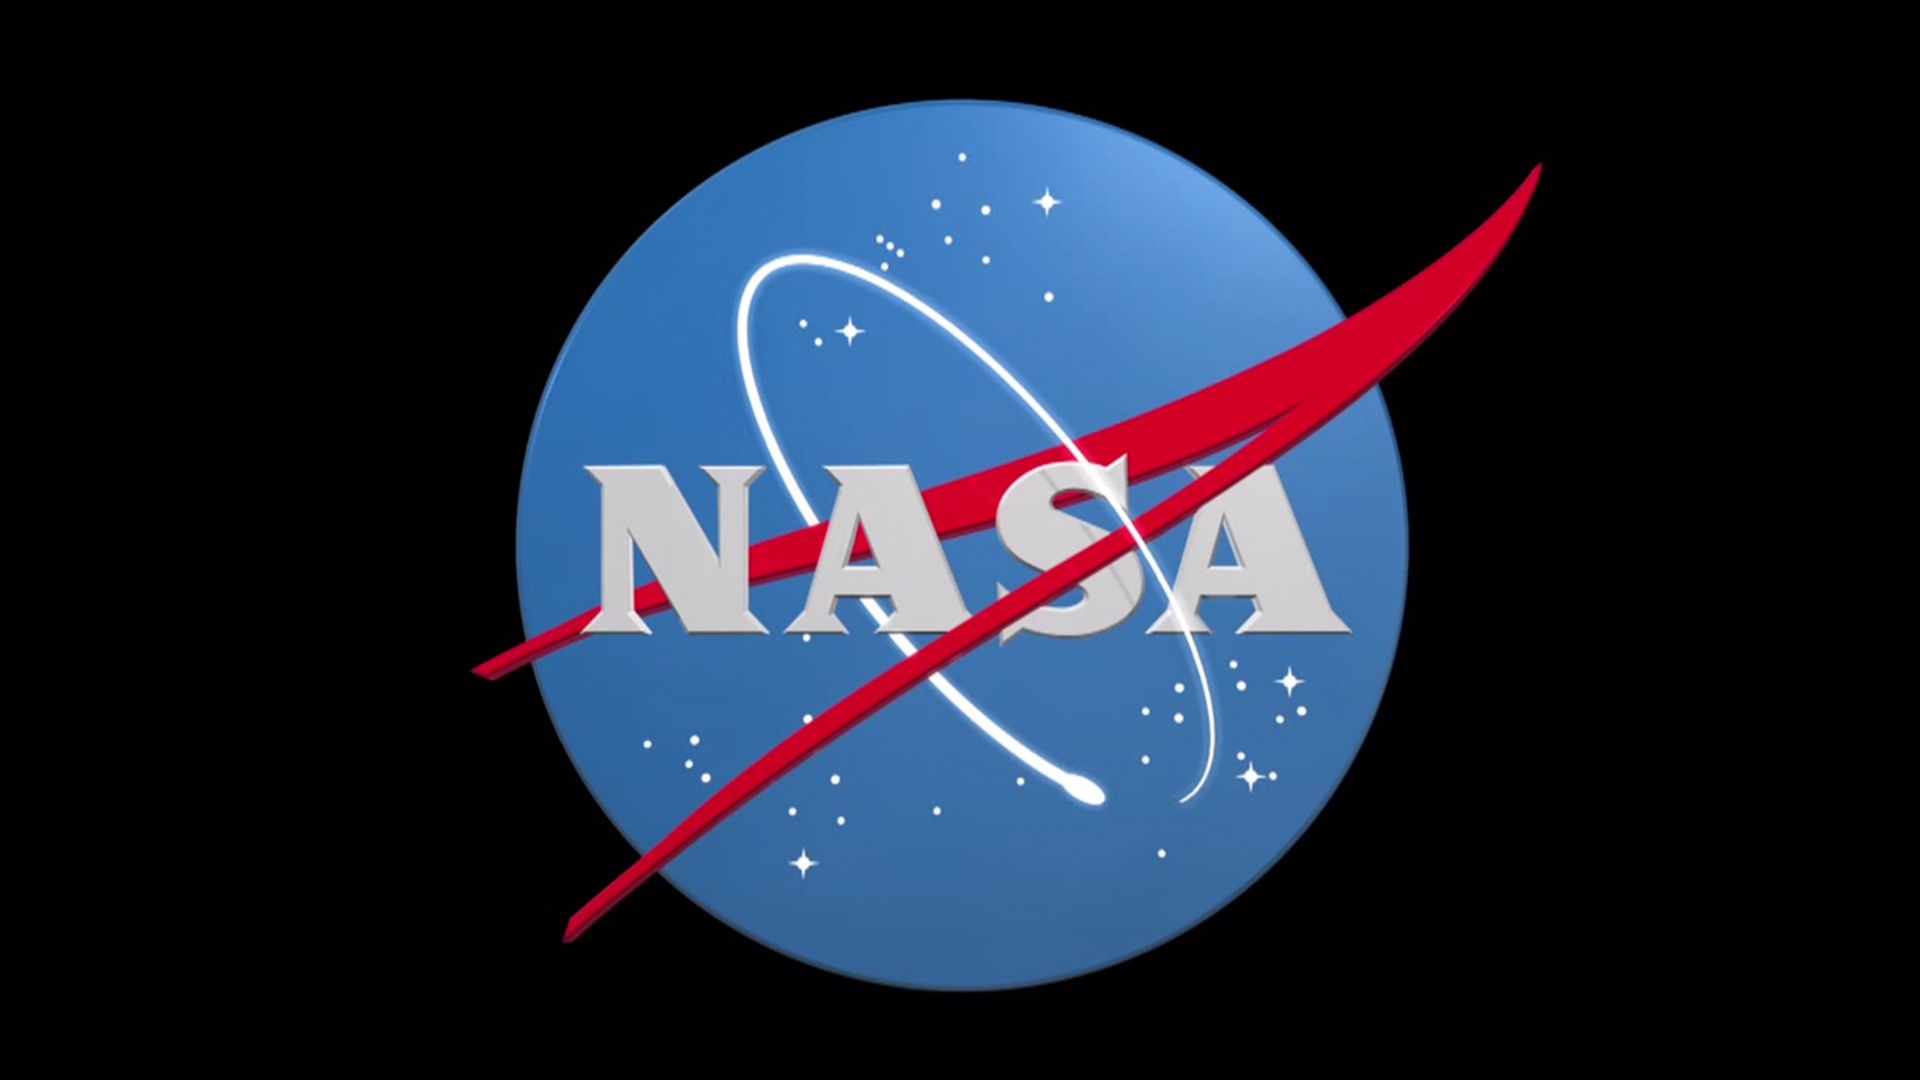 Free download Related Keywords amp Suggestions for nasa logo